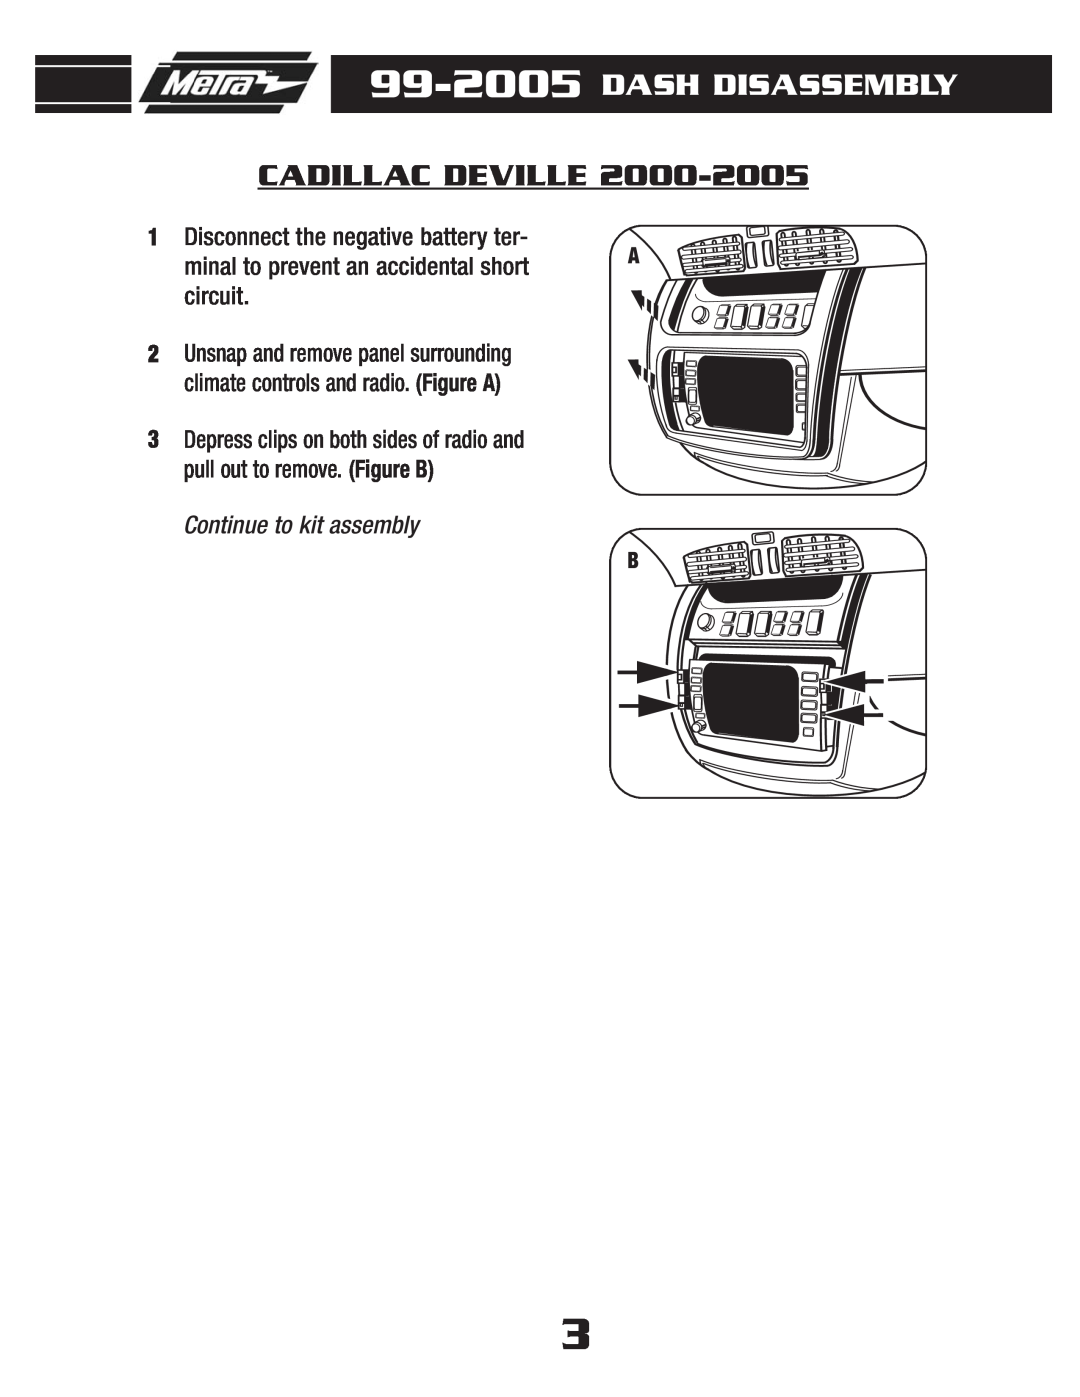 Metra Electronics 99-2005 installation instructions Cadillac Deville, Dash Disassembly, Continue to kit assembly 